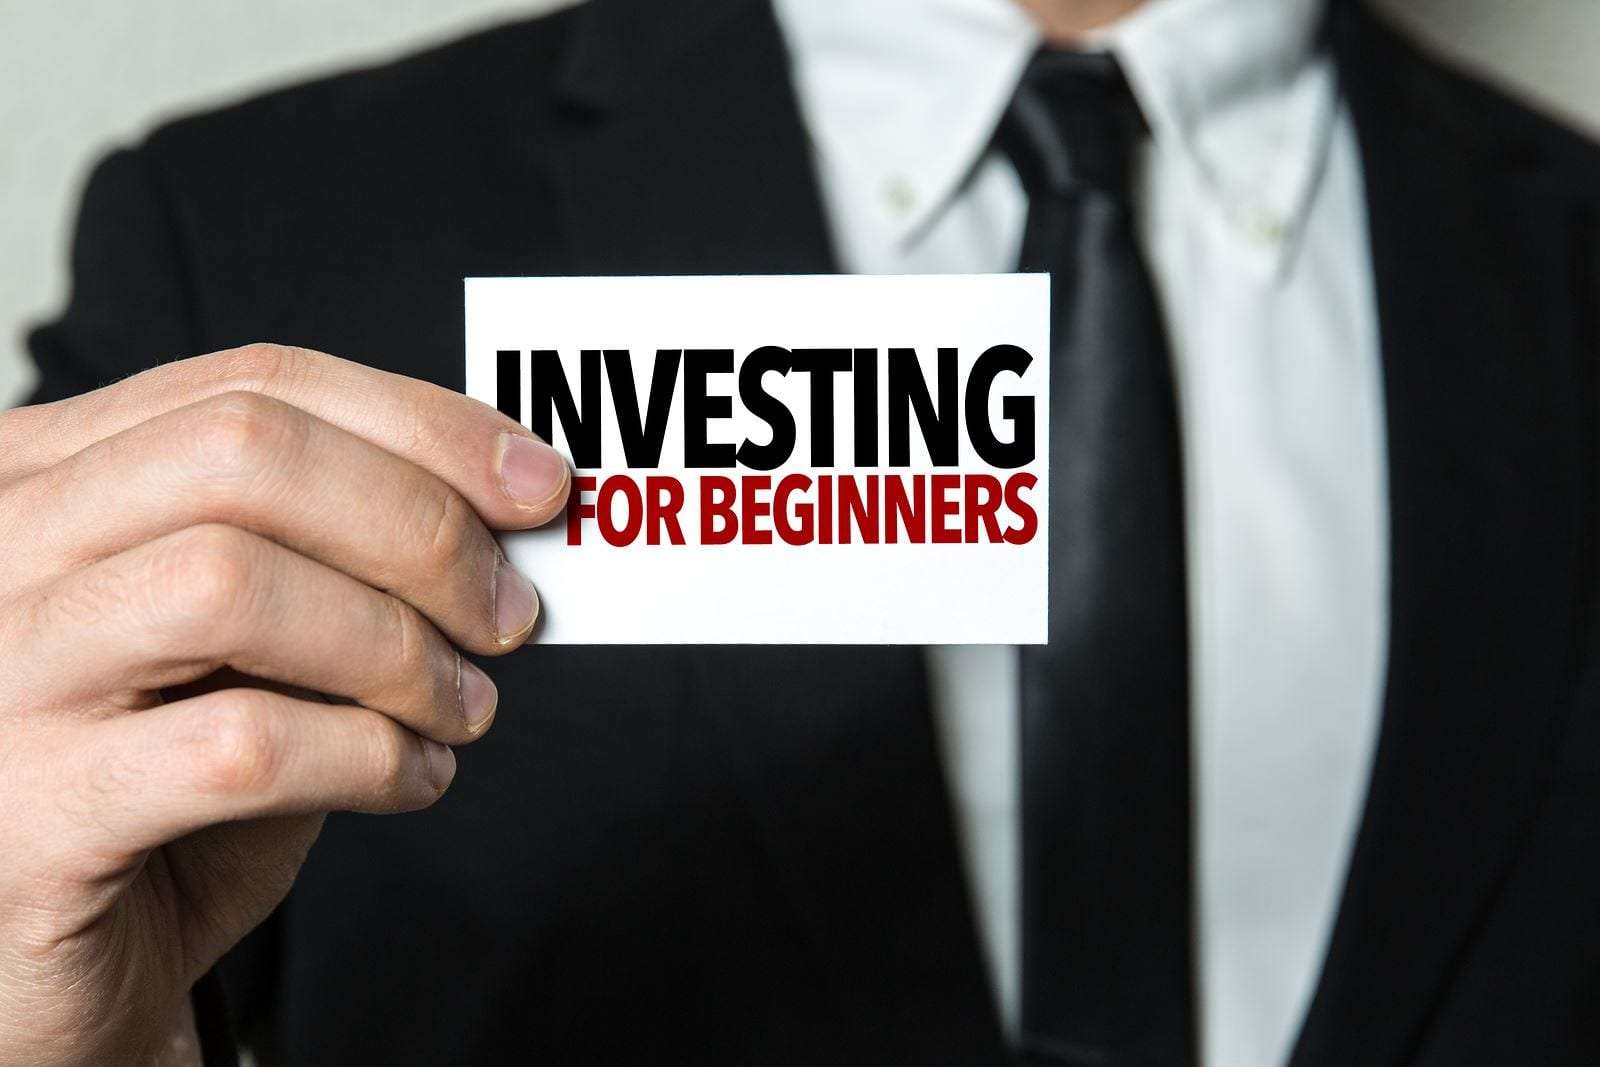 Real Estate Investing for Beginners 2020: 10 Tips